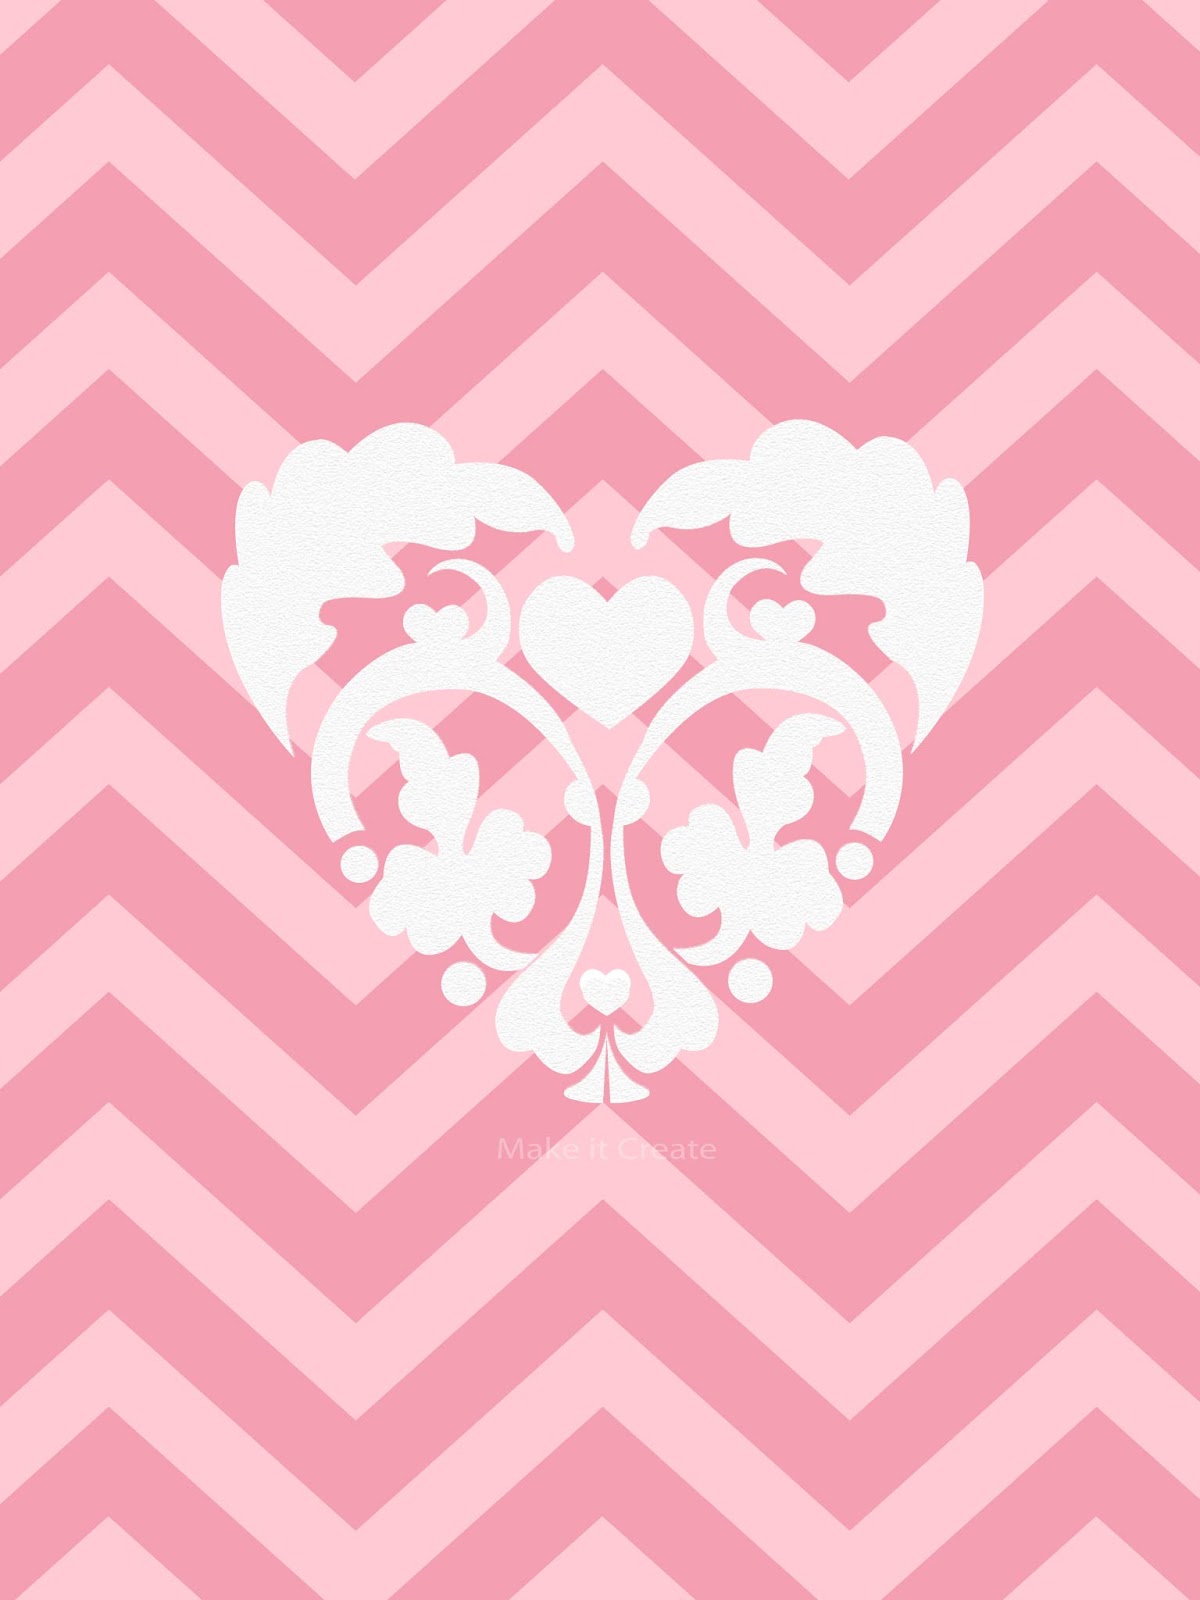 ... --Printables & Backgrounds/Wallpapers: Valentine Chevron for iPad